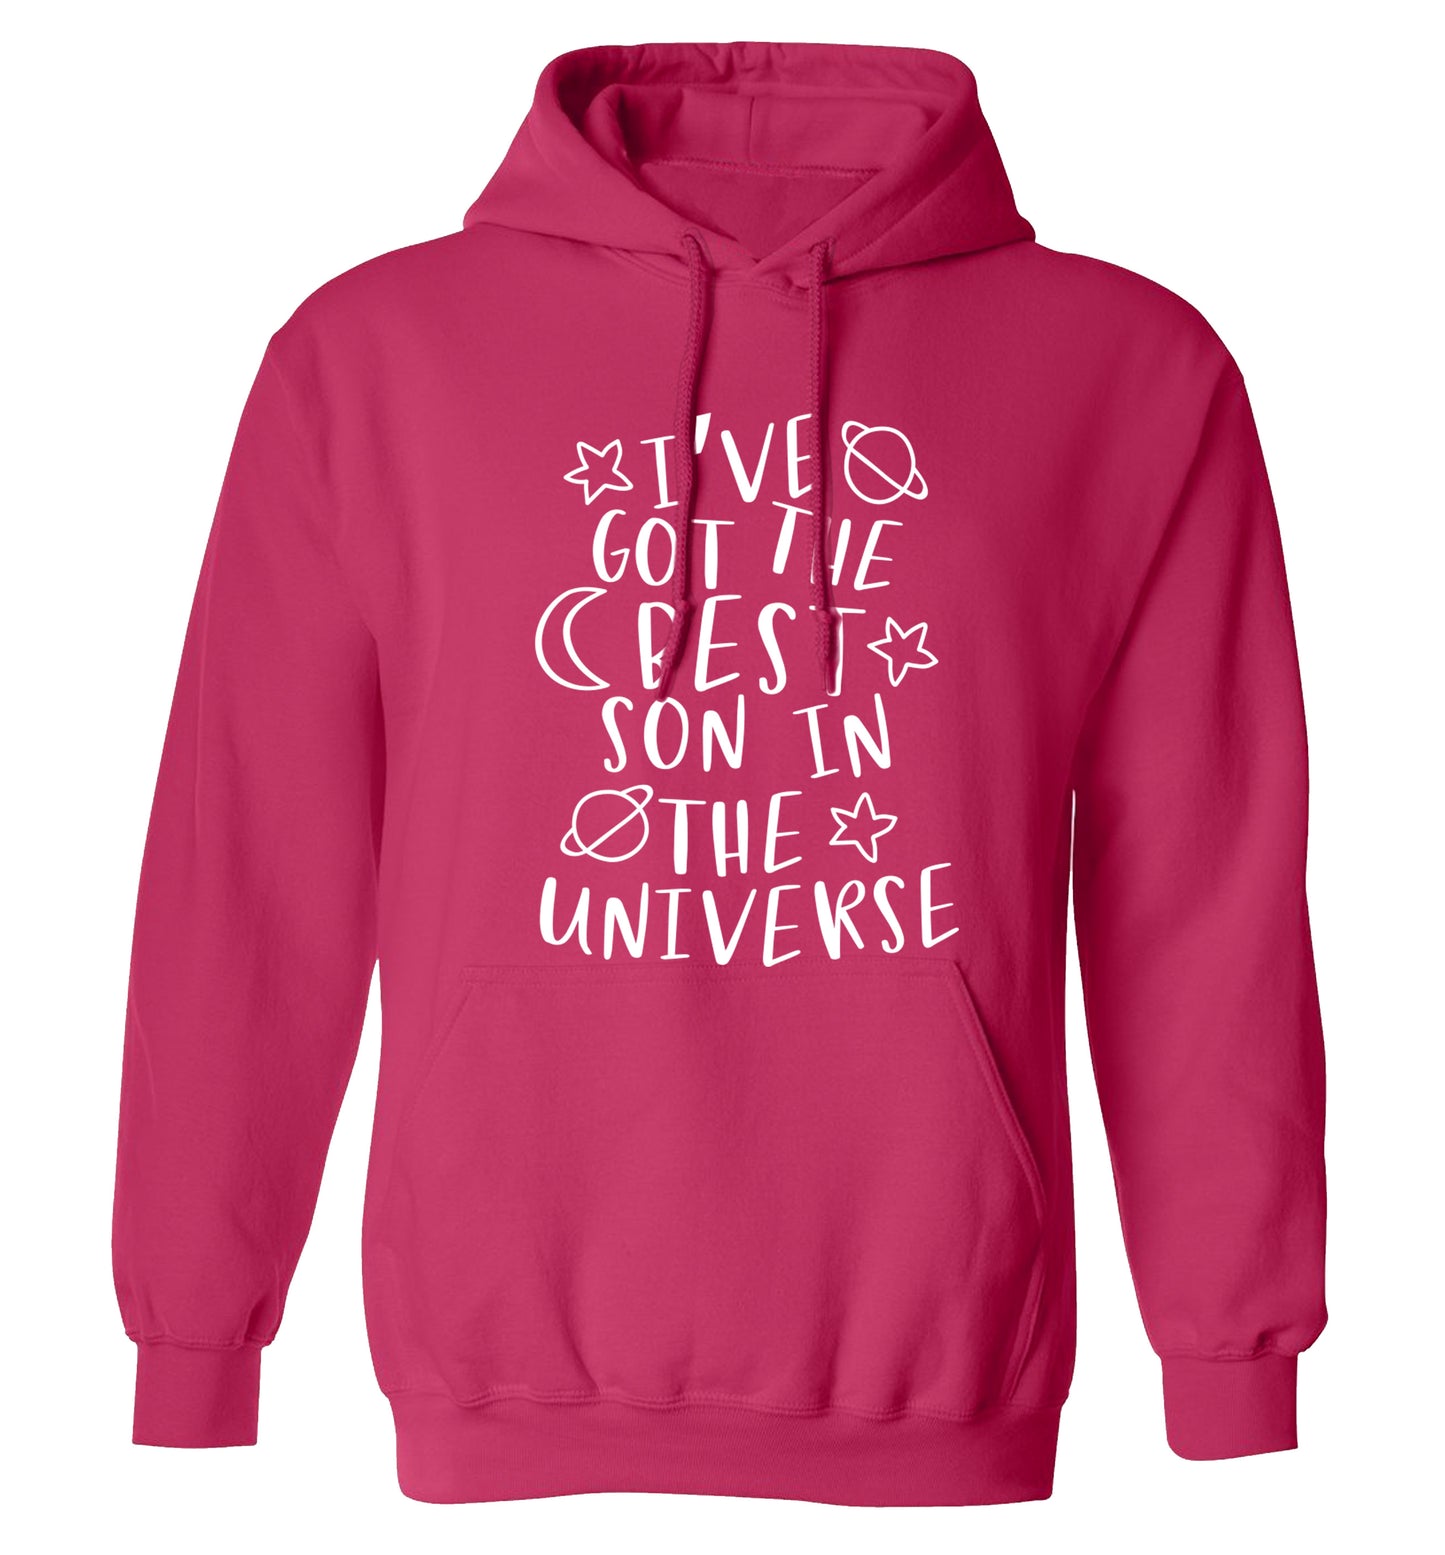 I've got the best son in the universe adults unisex pink hoodie 2XL